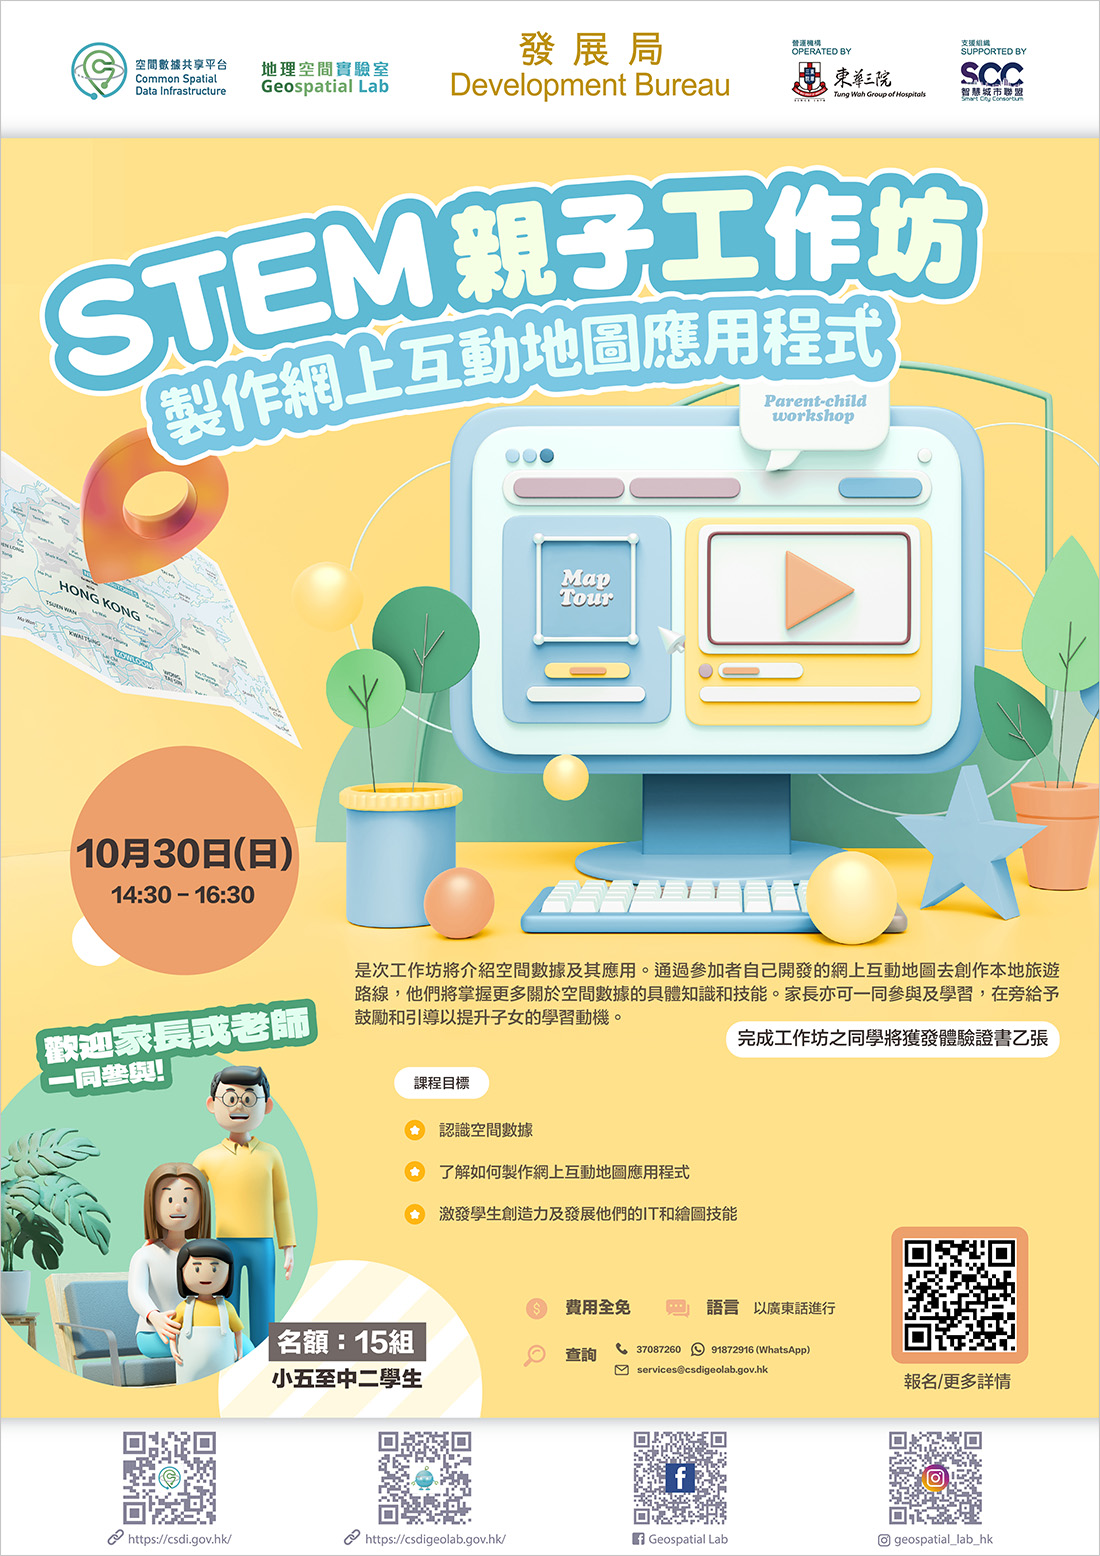 STEM Parent-child Workshop "Create an Interactive Web Mapping Application"